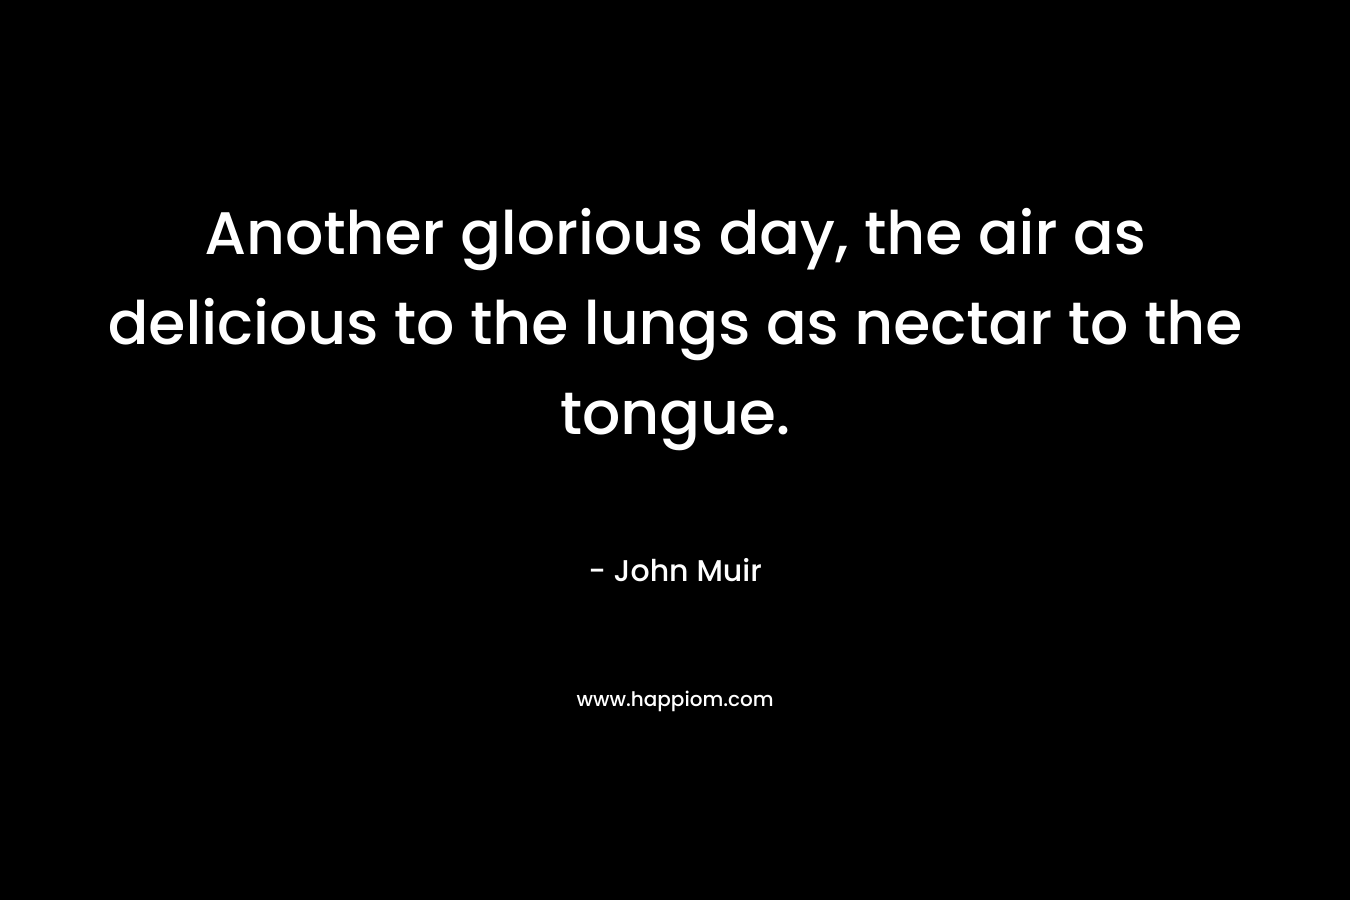 Another glorious day, the air as delicious to the lungs as nectar to the tongue.